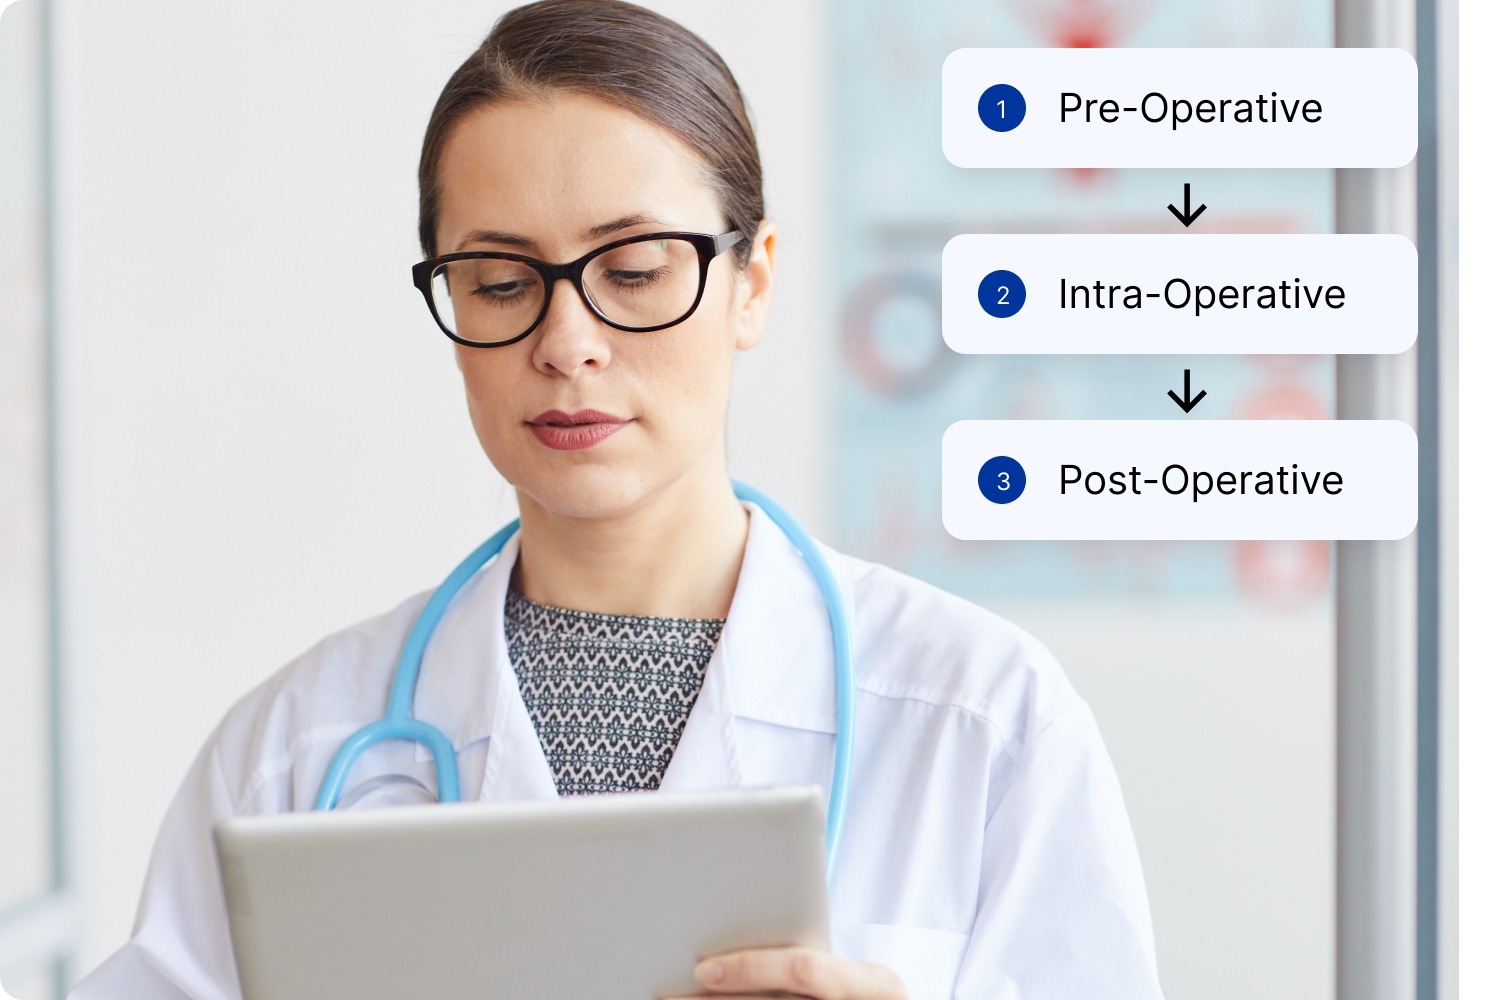 Female doctor using EMR & EHR system at a surgery center